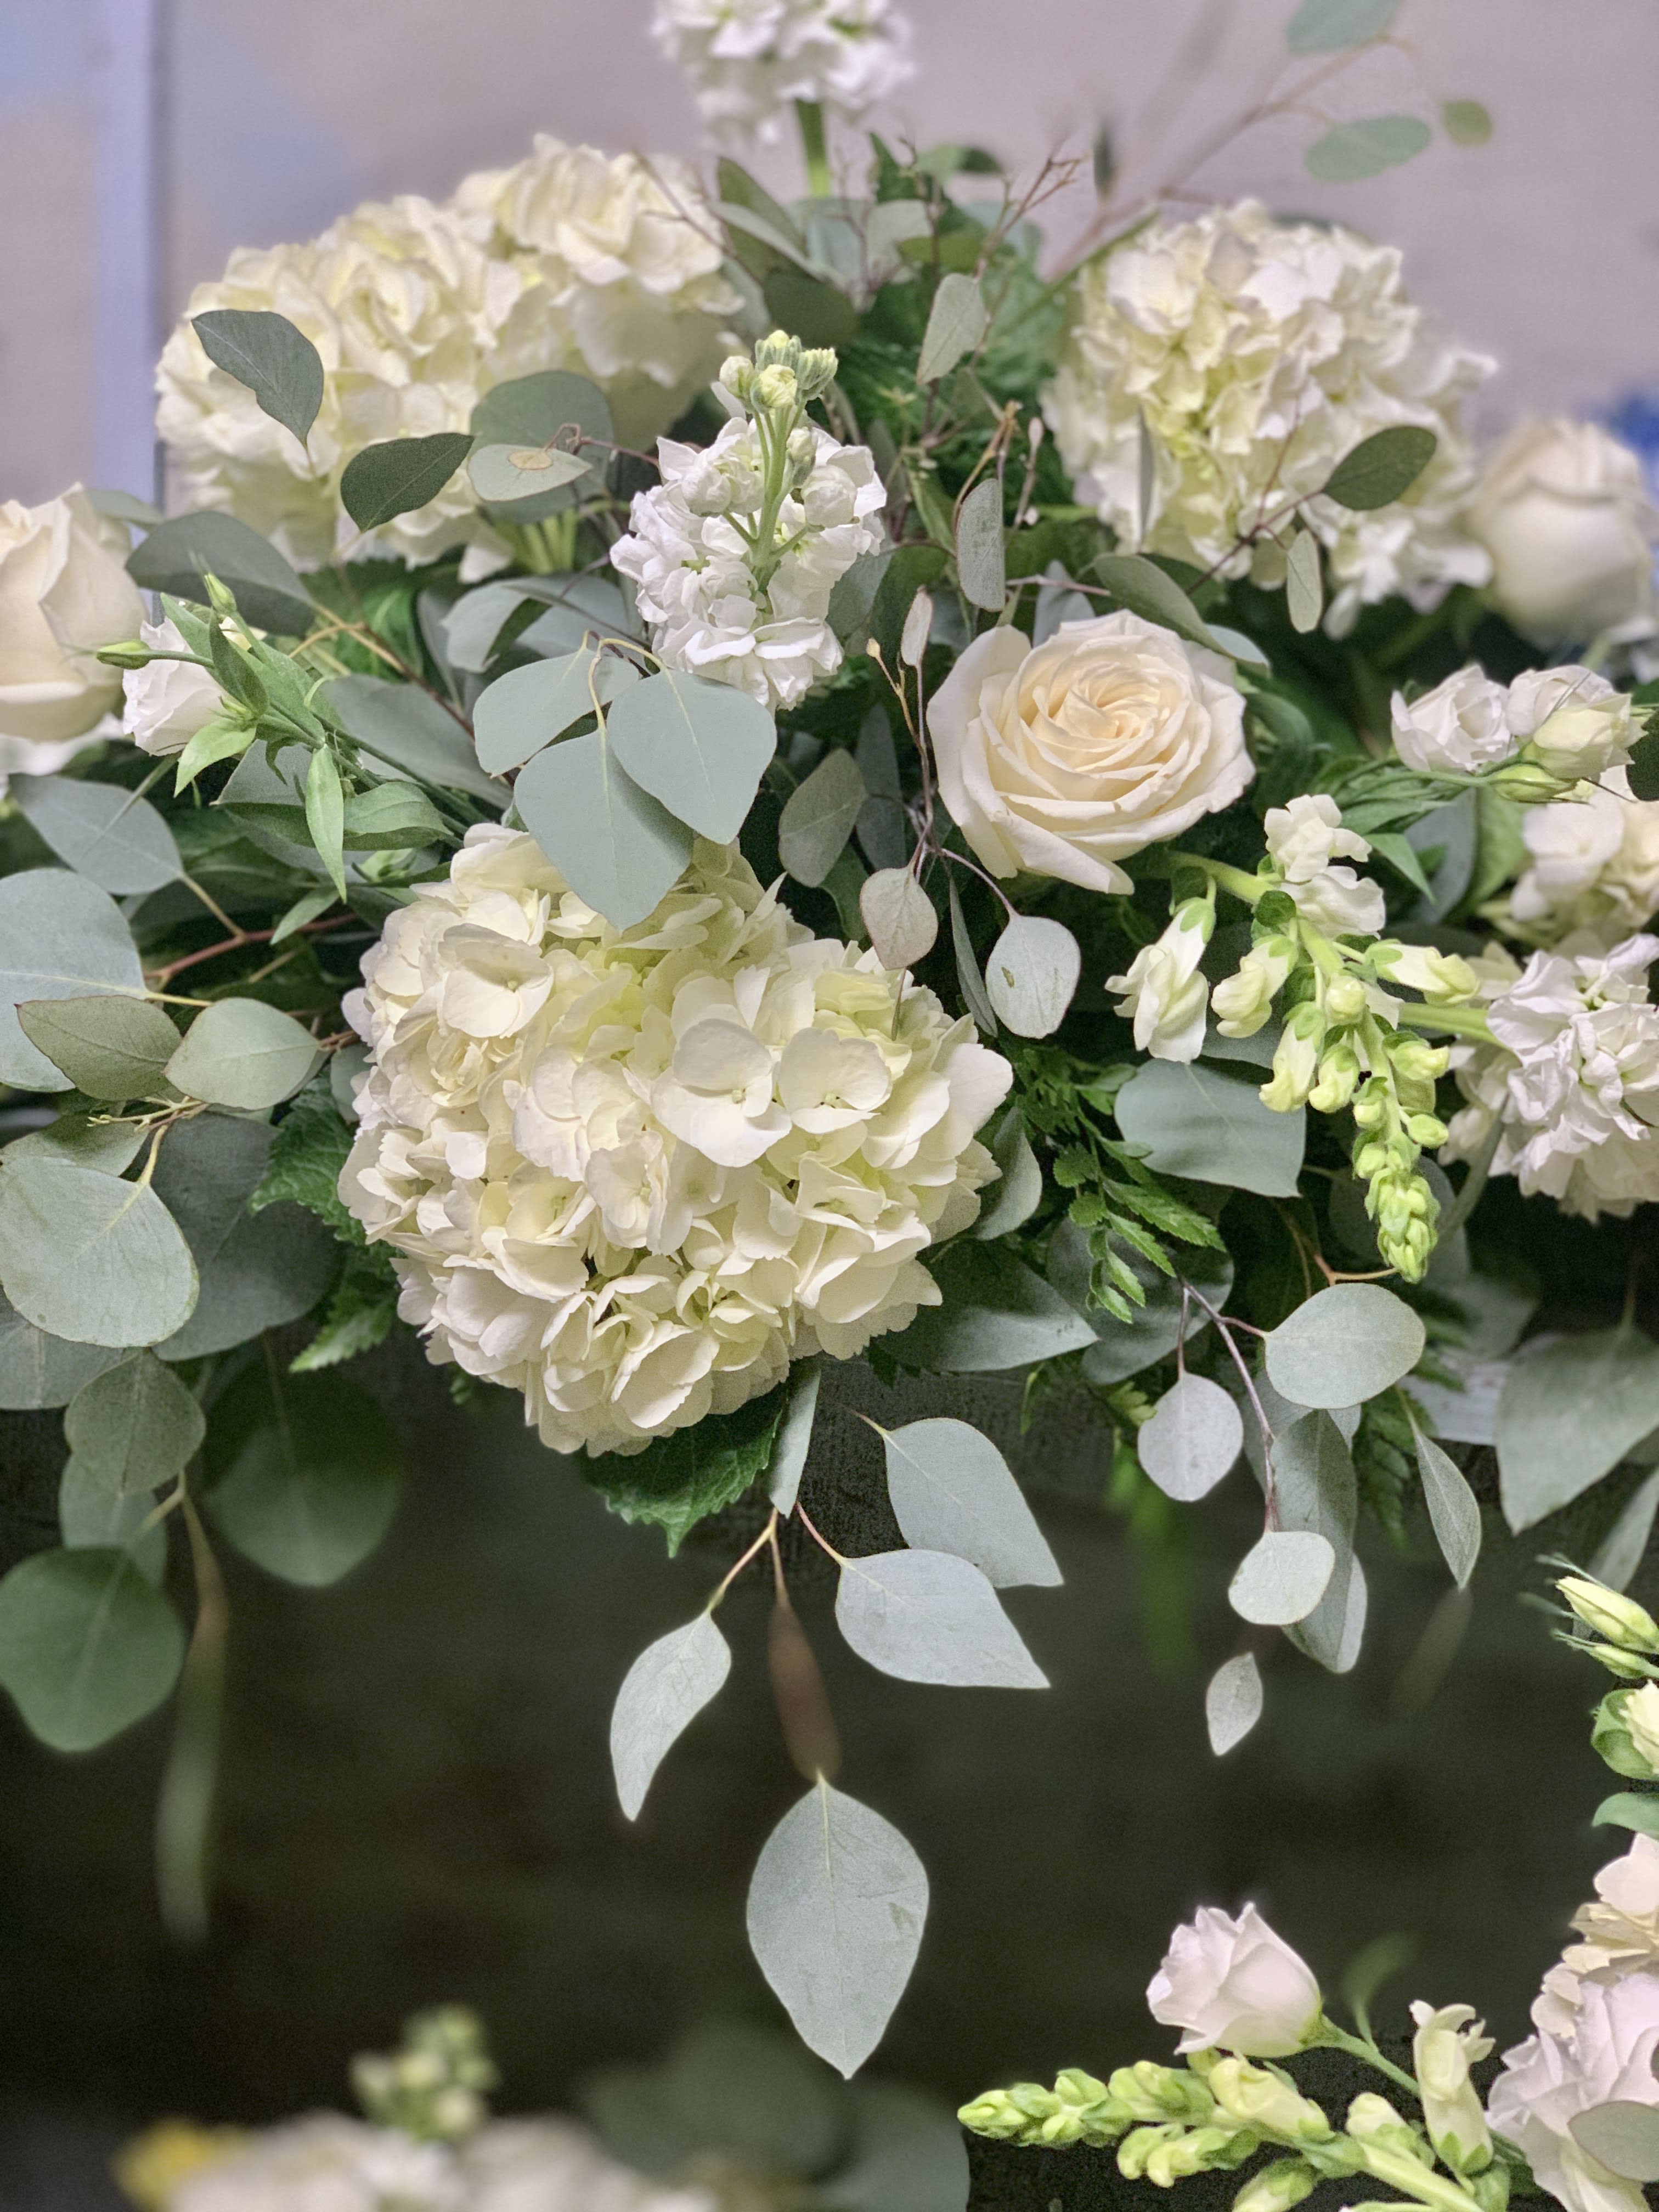 Simply White - Keep it simple!  This simply white arrangement is a Sunnyside Specialty created by the talented florists at Sunnyside Garden.  So versatile it is the perfect choice for just about any occasion...wedding, birthday, anniversary, romance or just because!  